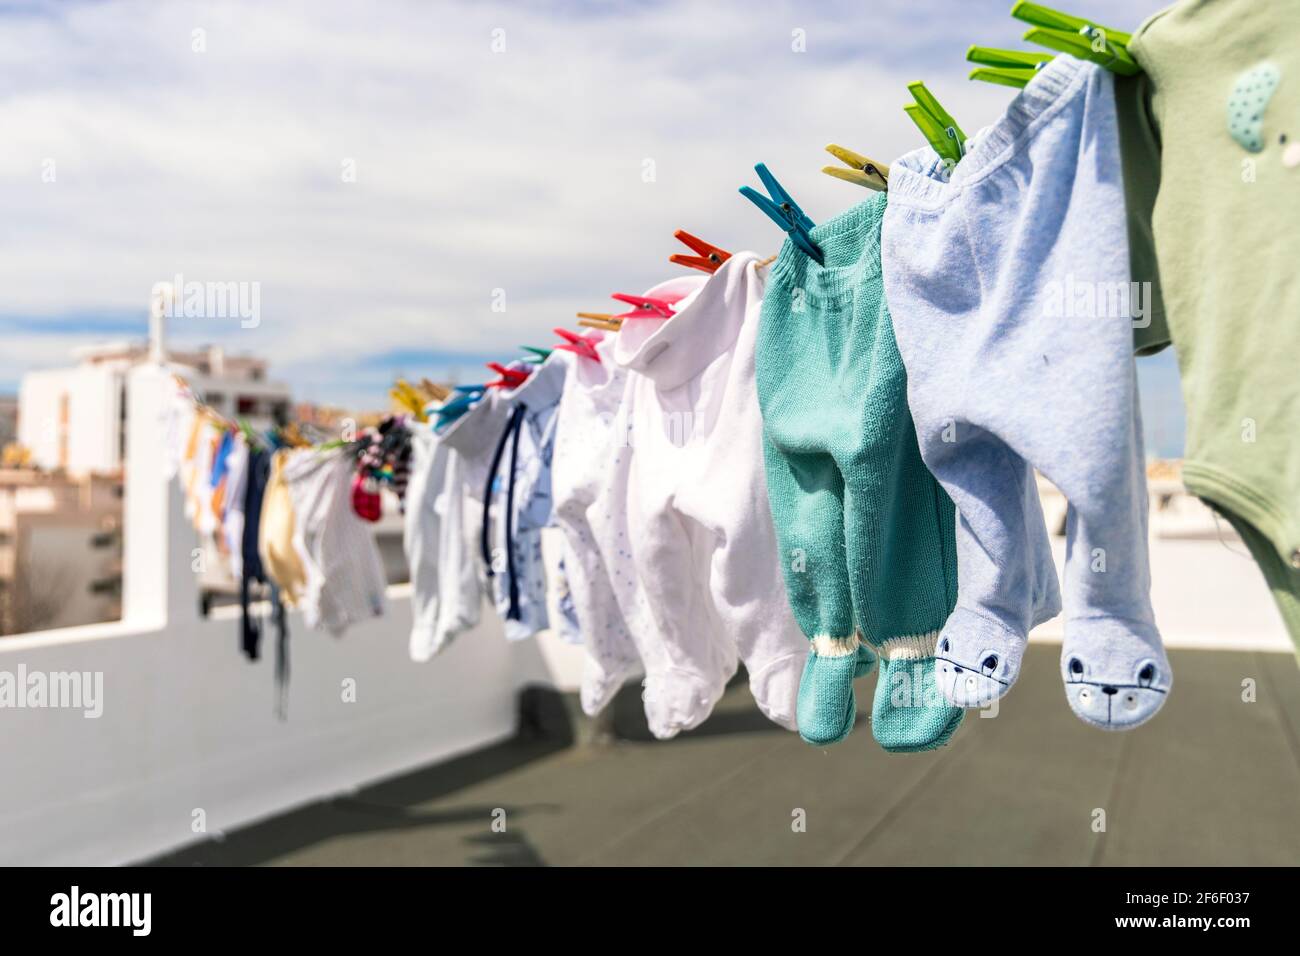 A lot of baby clothes drying on the roof in the city Stock Photo